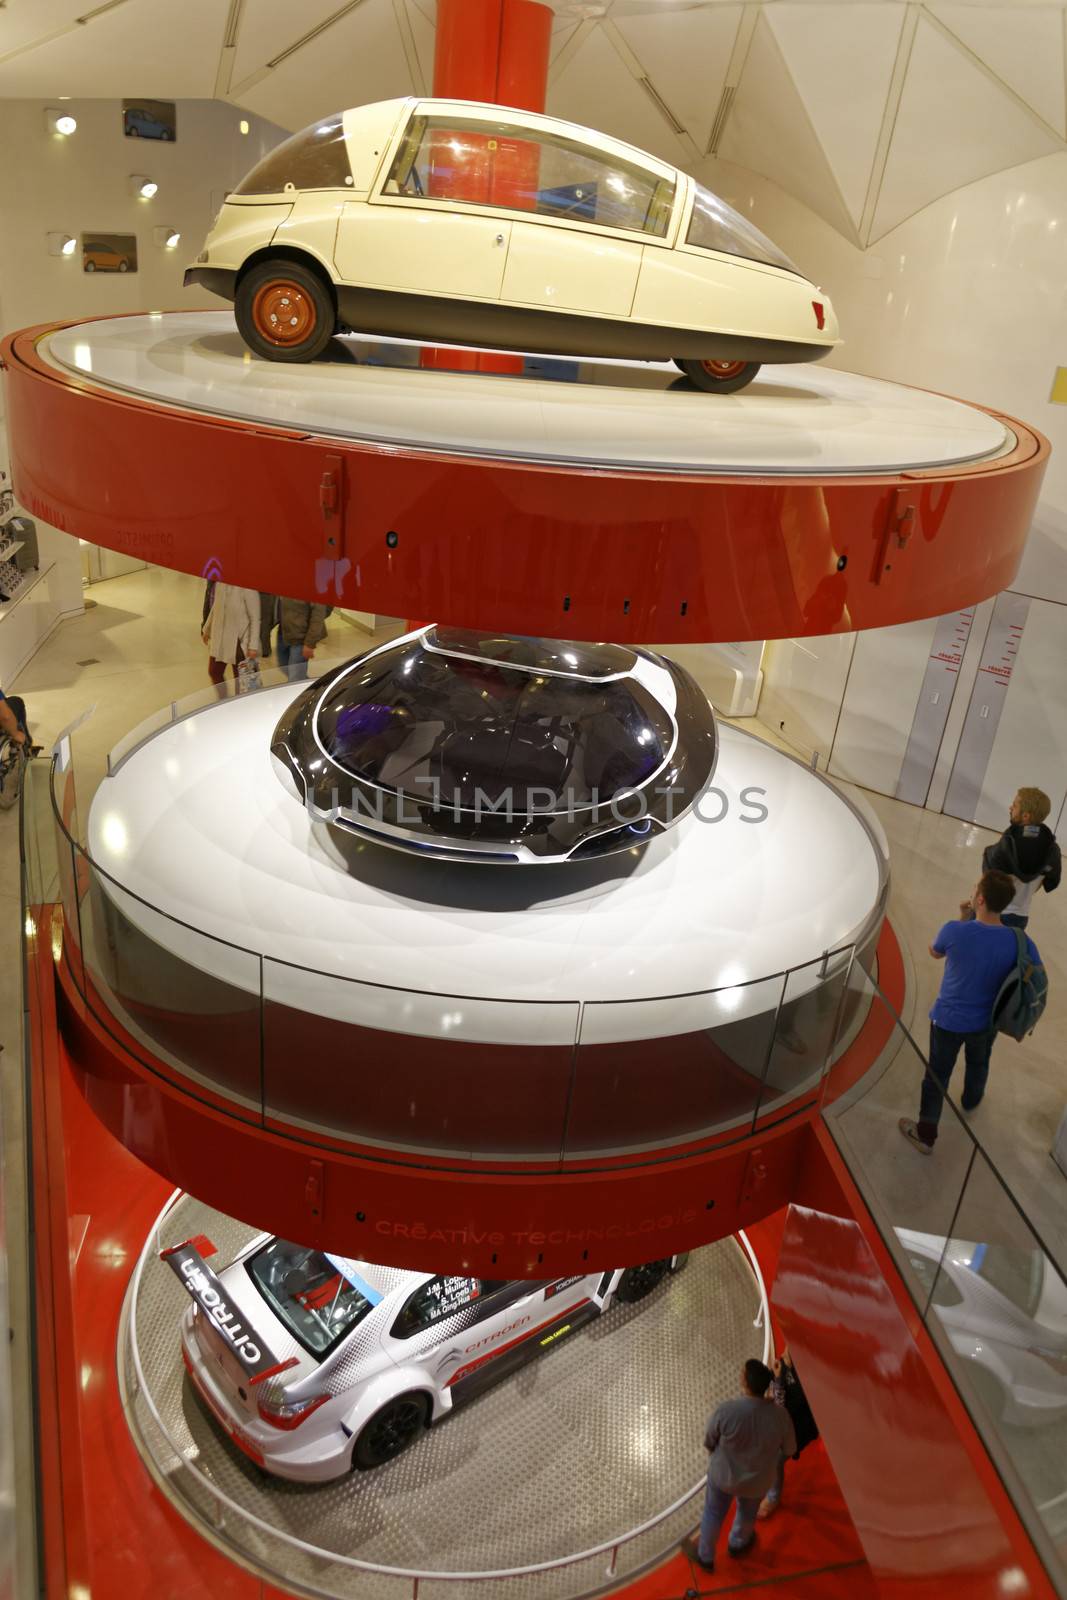 FRANCE, Paris: UFO 2011 Citro�n model design by Ora-�to is pictured at Citro�n C_42 showroom in Paris on October 2, 2015 on the launch of Citro�n [RE�Mix new exhibition.